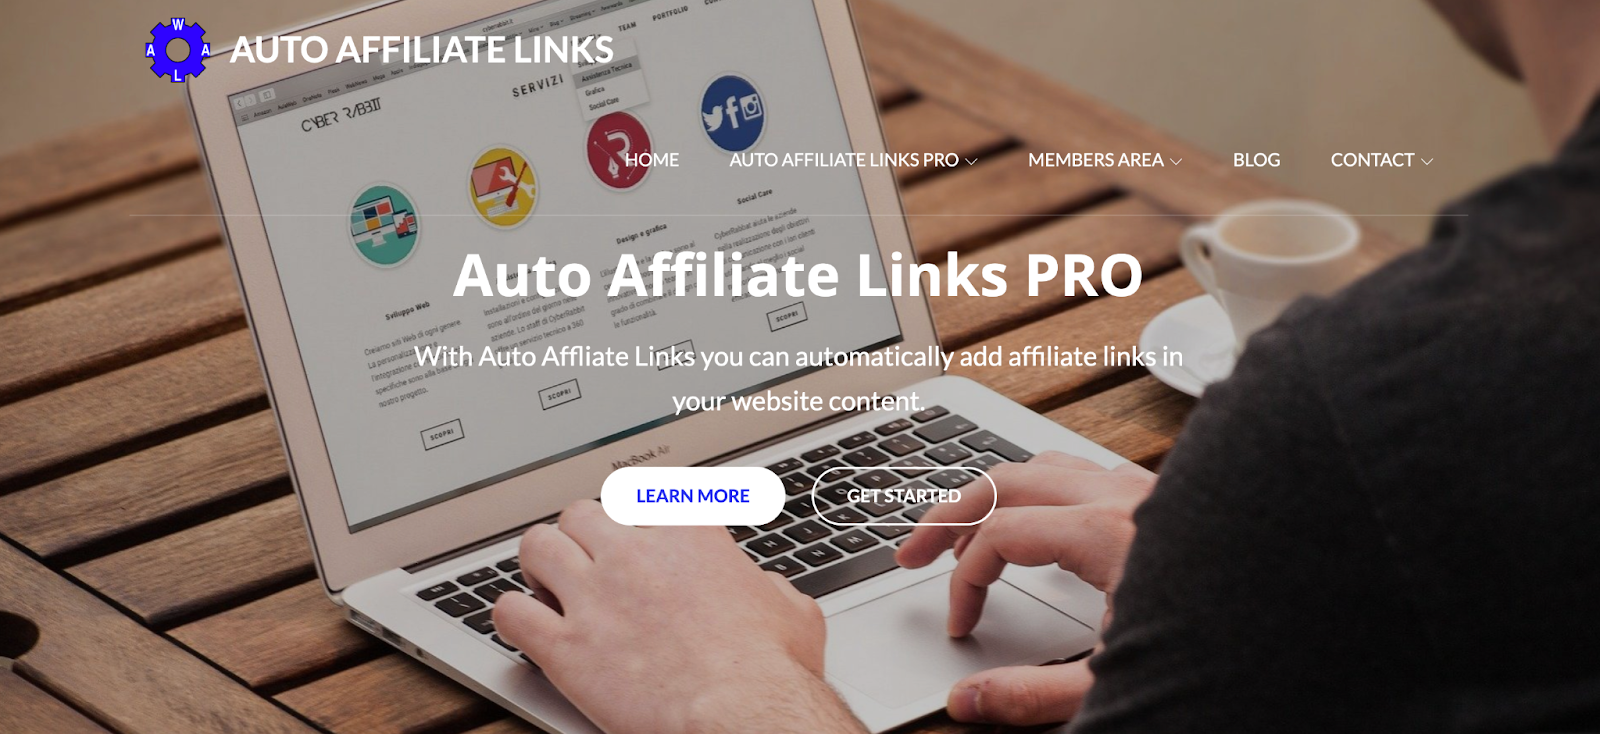 A screenshot of the Auto Affiliate Links homepage featuring a photo of a man typing on a computer as well as links to Auto Affiliate Links Pro